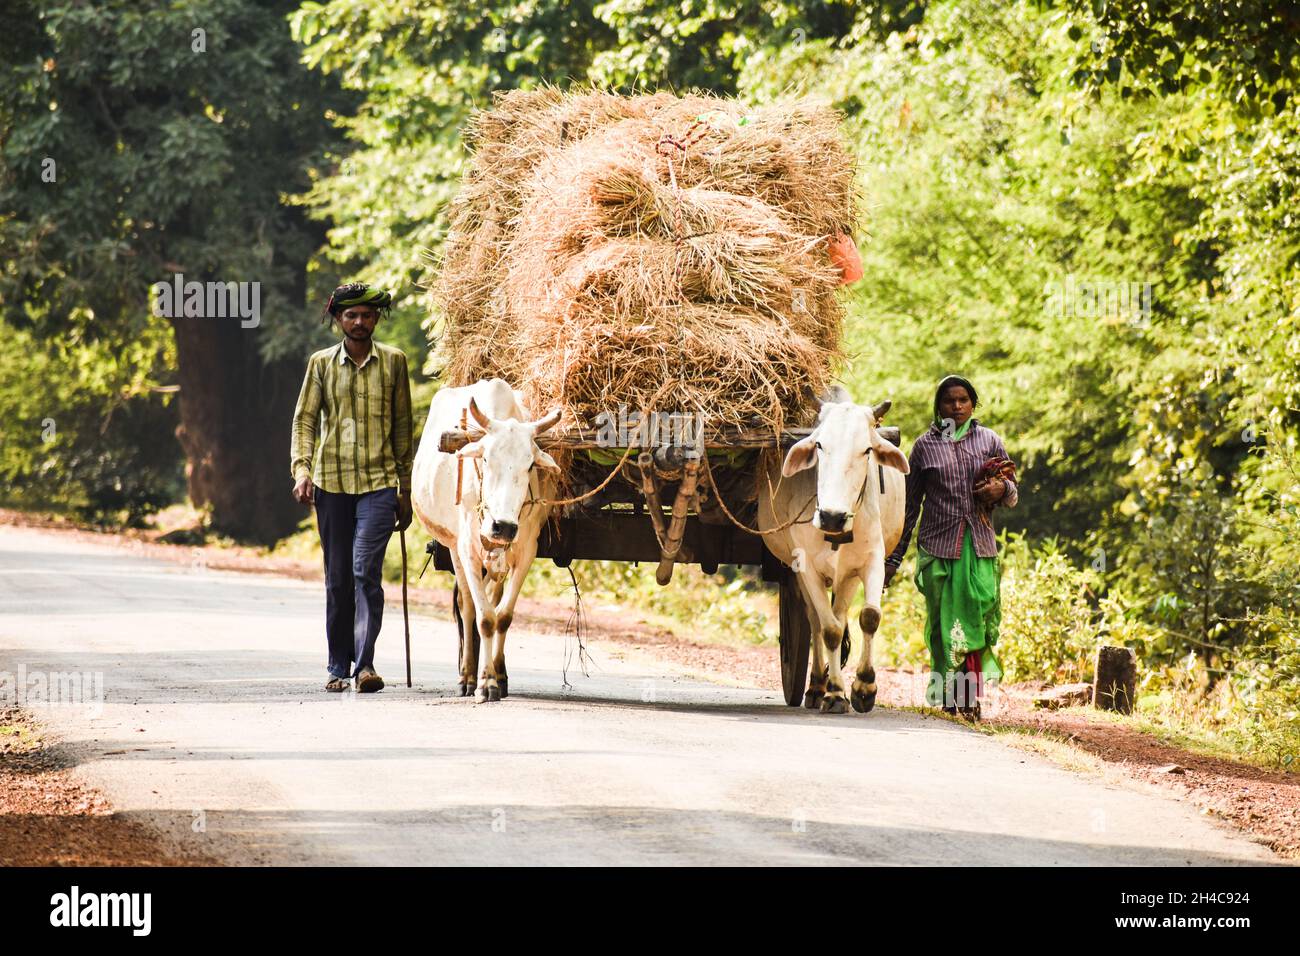 DHAMTARI, INDIA - Apr 05, 2019: A harvested paddy load on Bullock with farmers Stock Photo